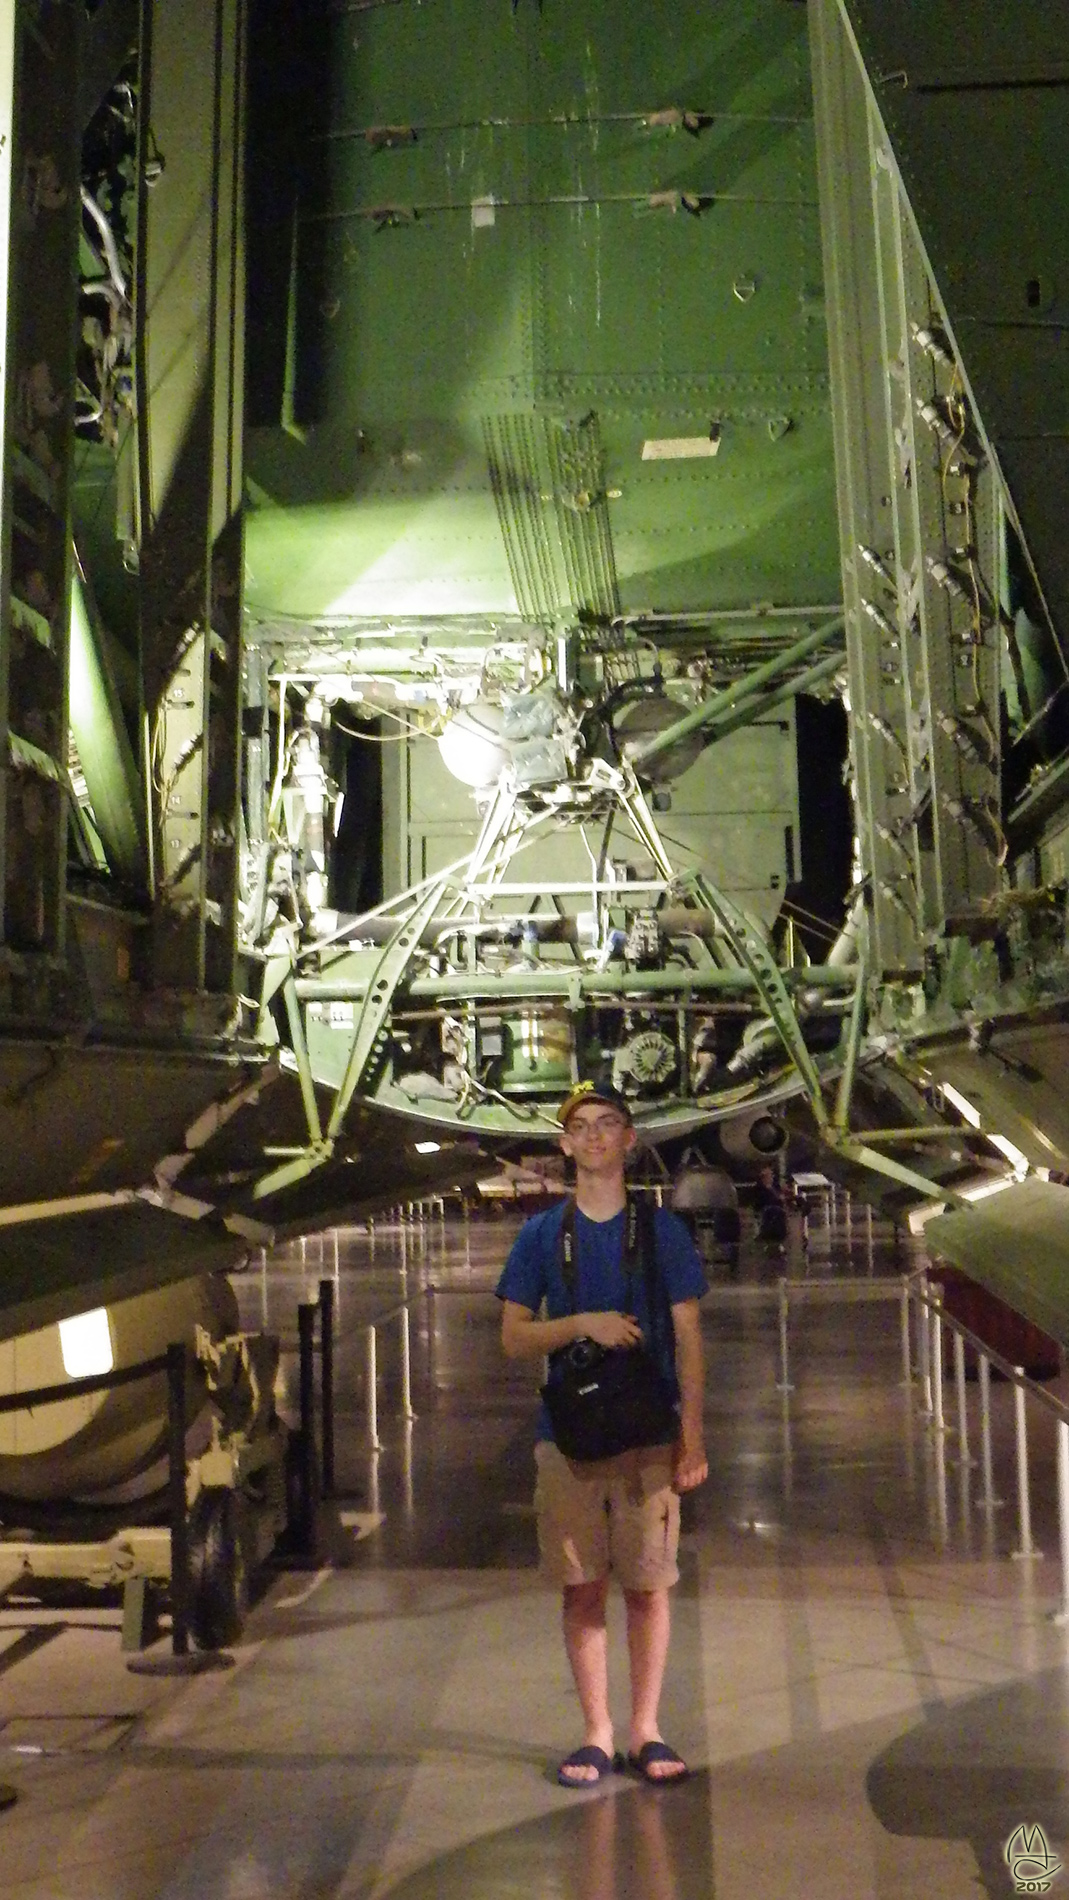 Inside the B-36 bomb bay. Big enough to drop a school bus from.